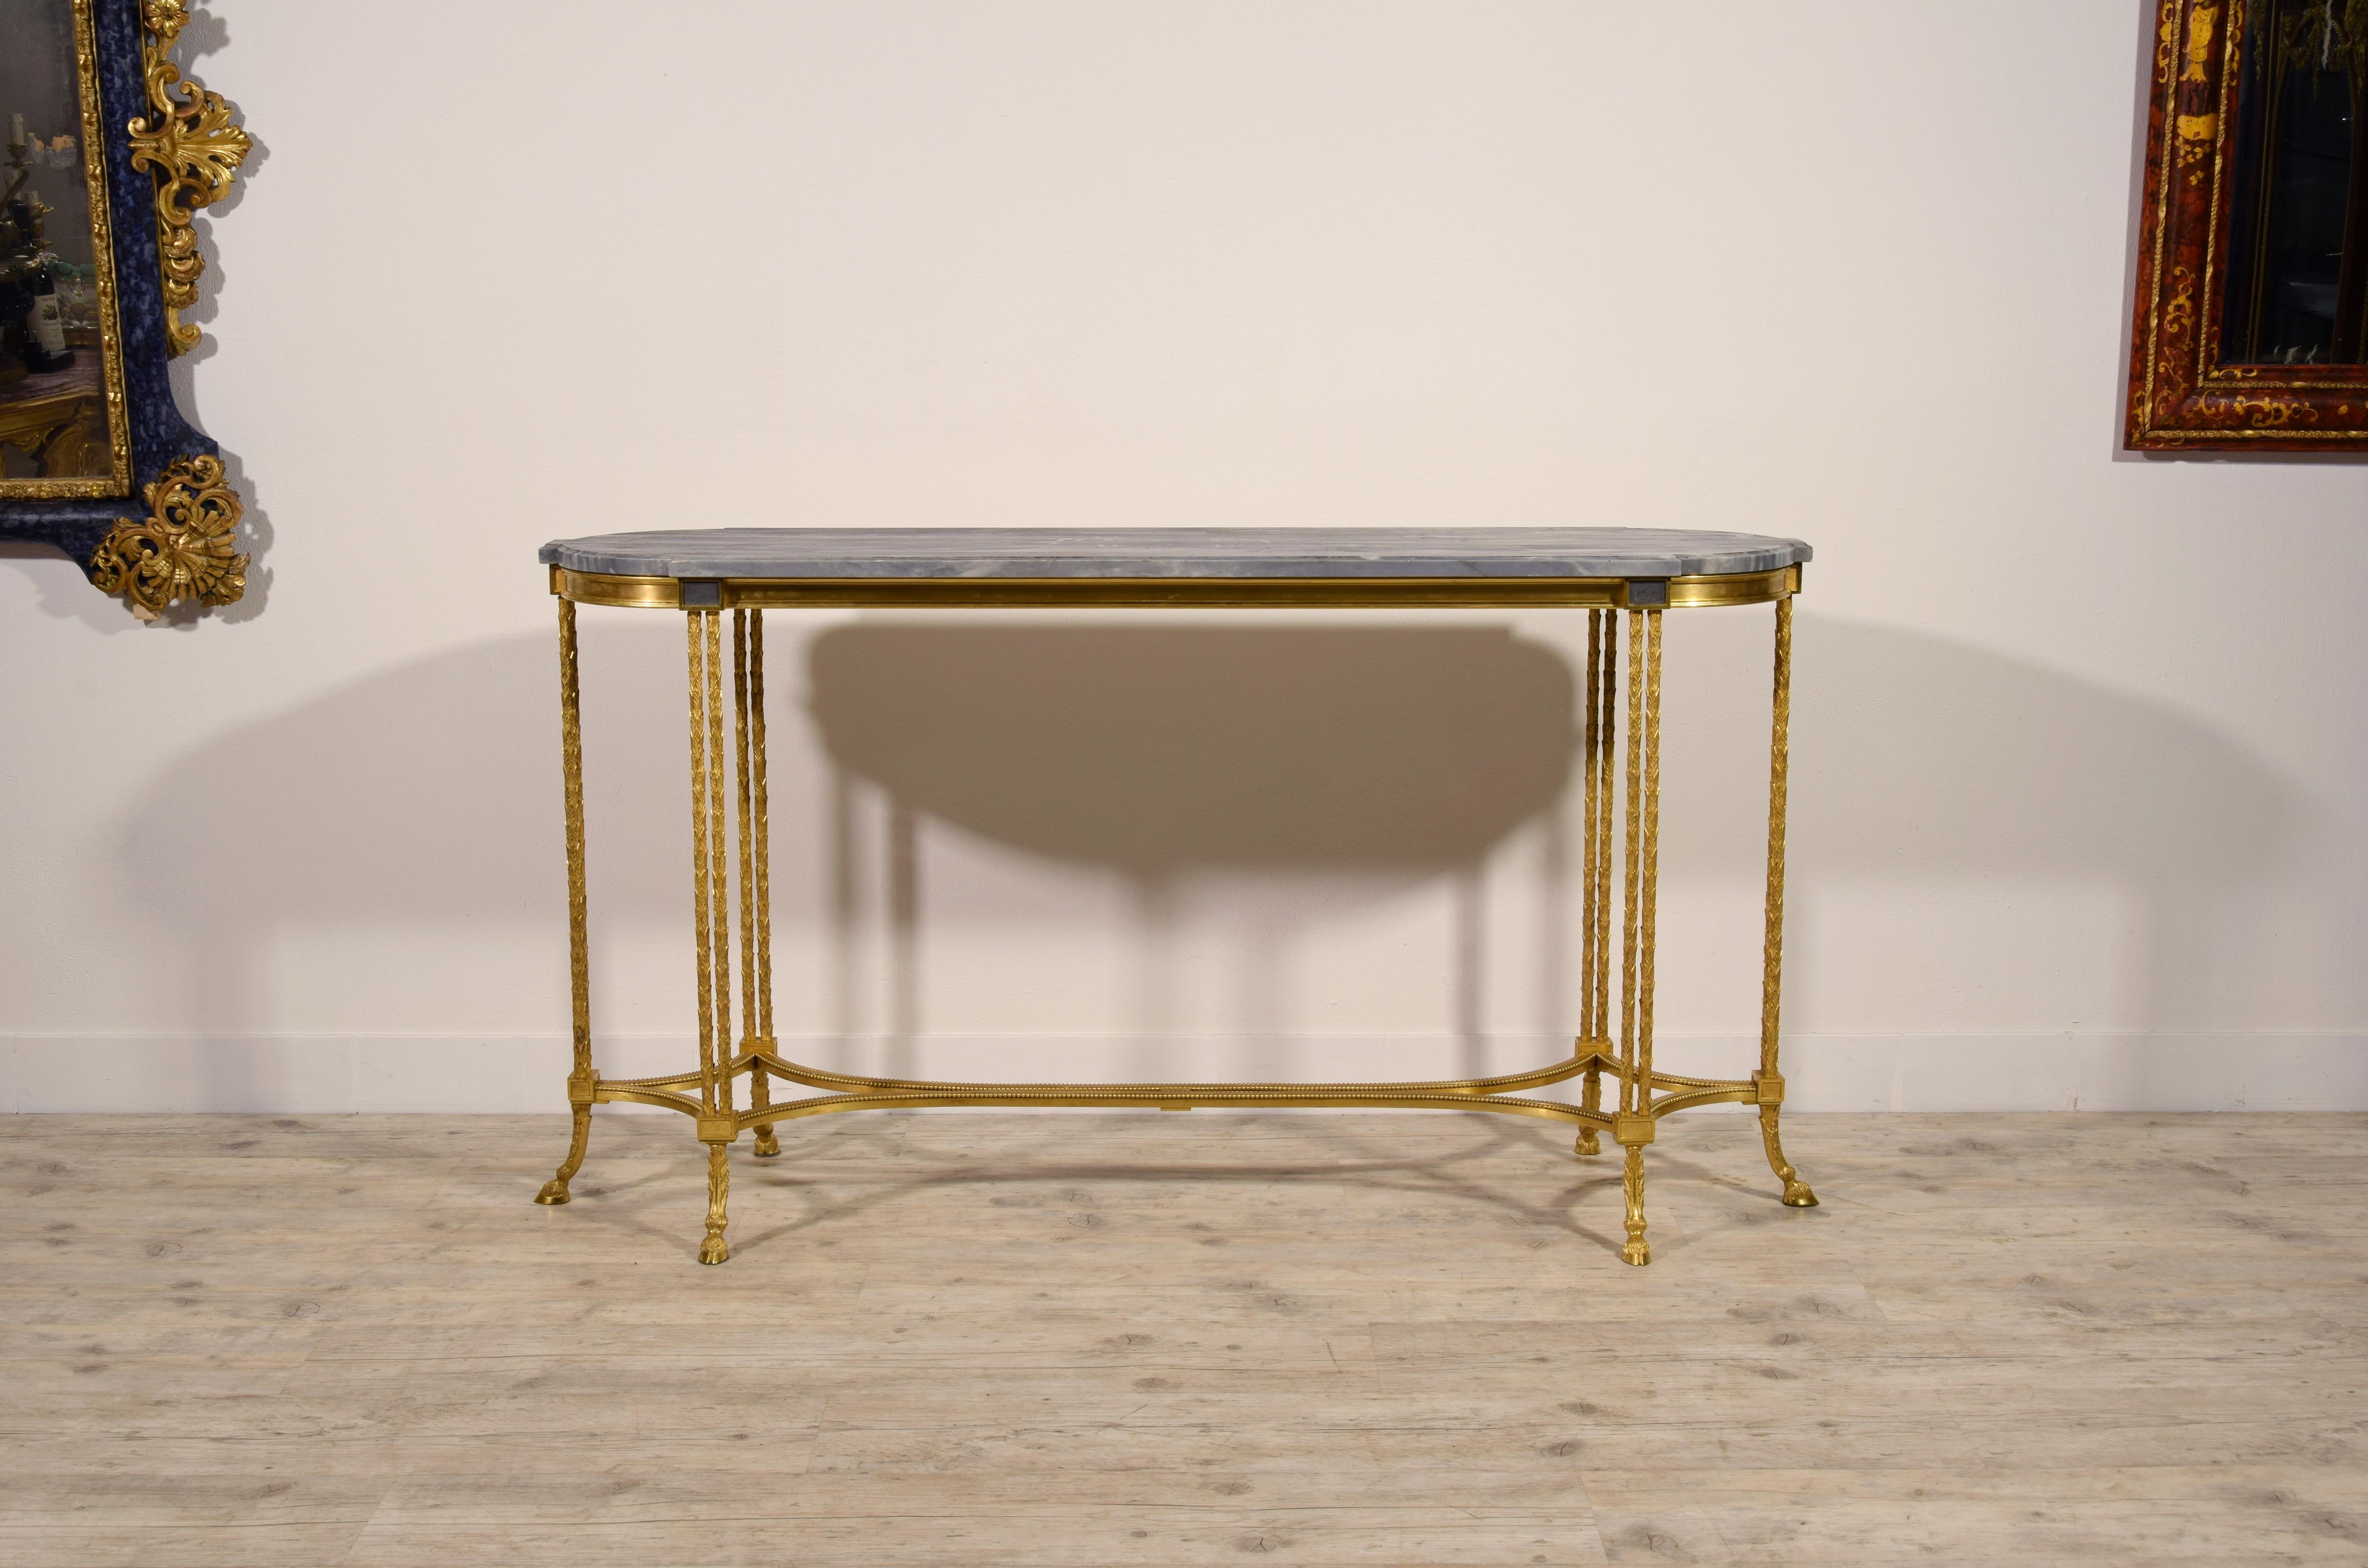 20th century, French gilt bronze console table by Maison Baguès

The refined and rare console table, made by the famous Maison Baguès manufacturer, consists of an oval shaped top in Turquin blue marble, from the blue grey coloration and from a